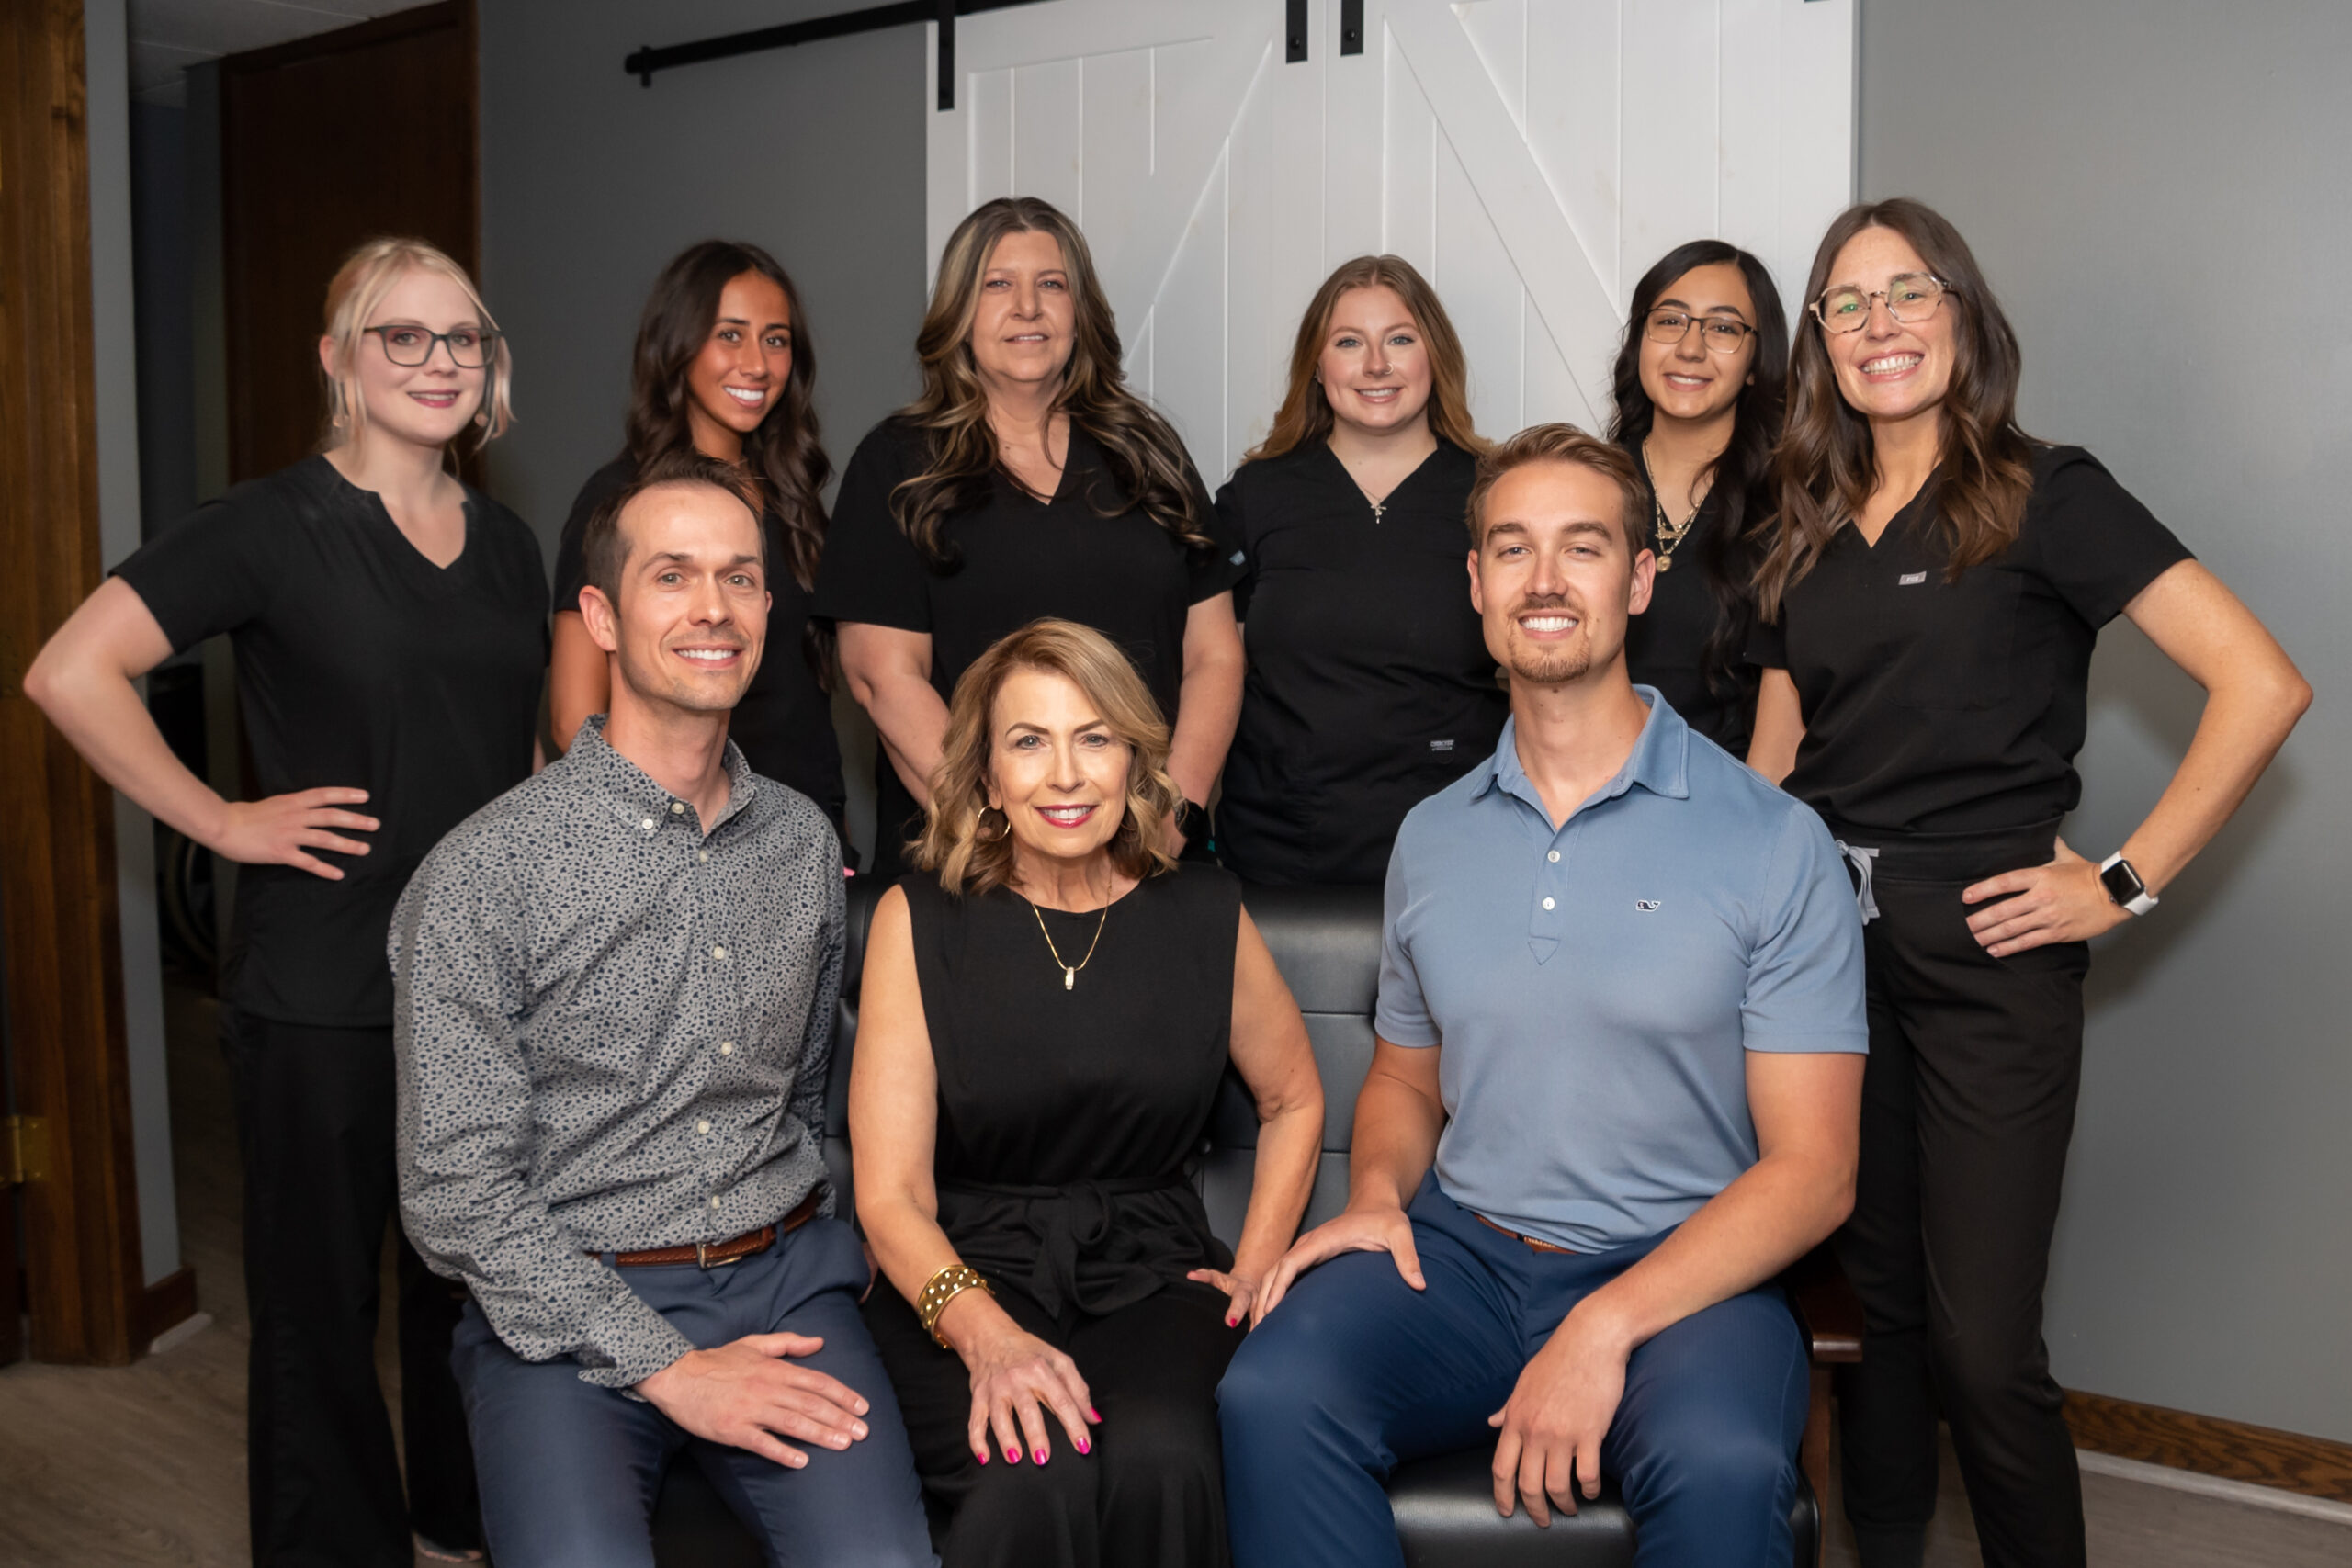 group photo of the Jordan Chiropractic & Acupunture staff